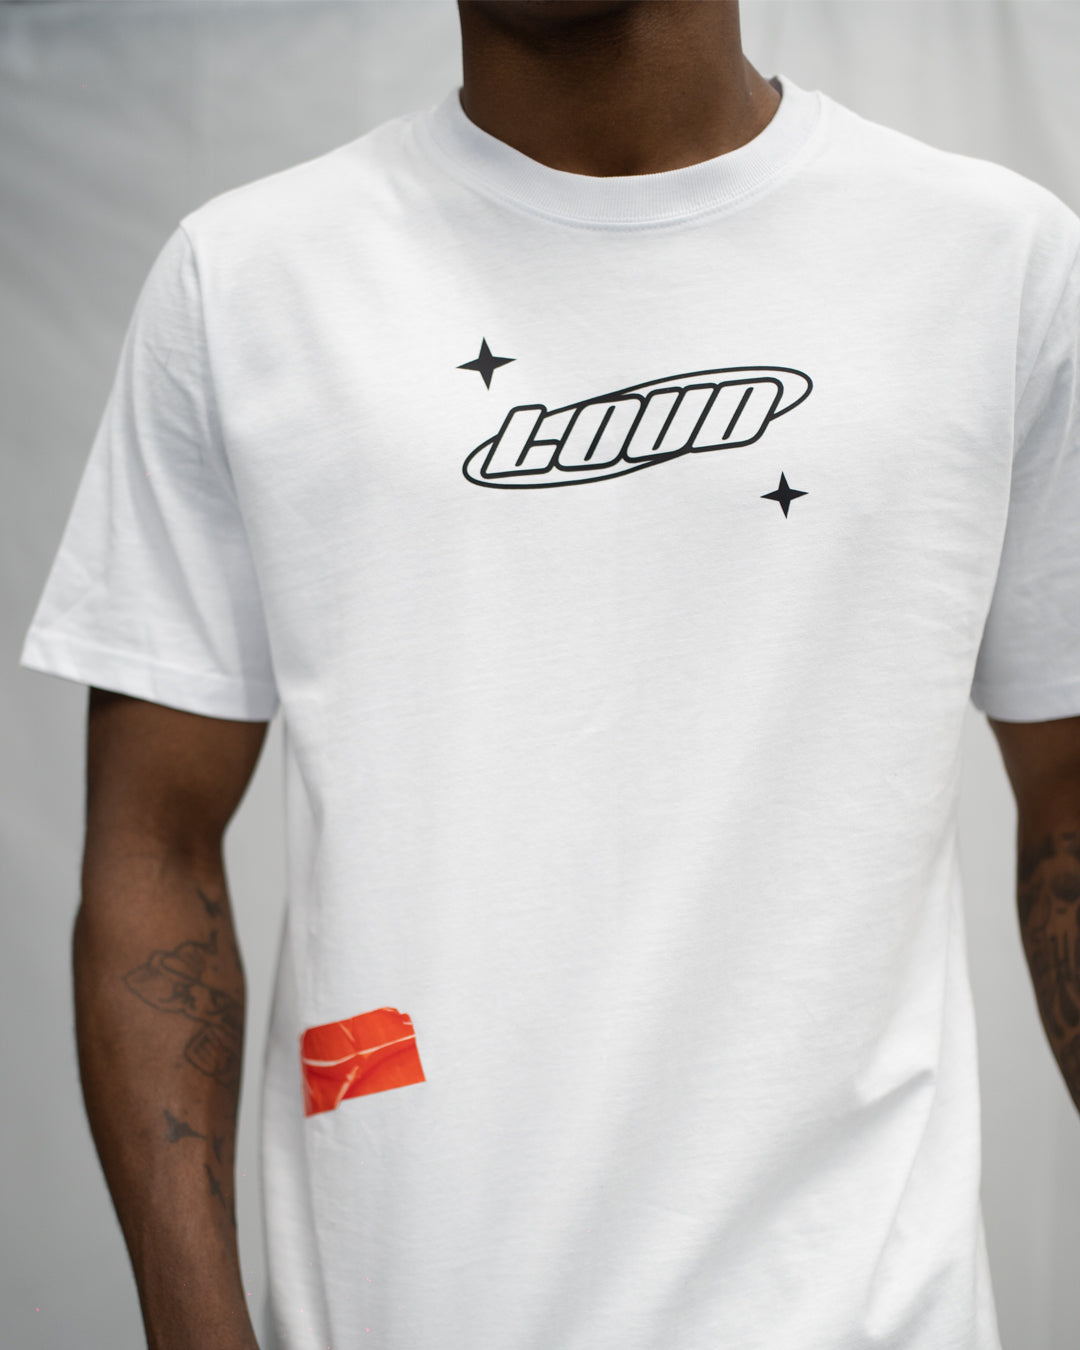 Loud Logo Red Tape - White T-Shirt - Live Look Loud